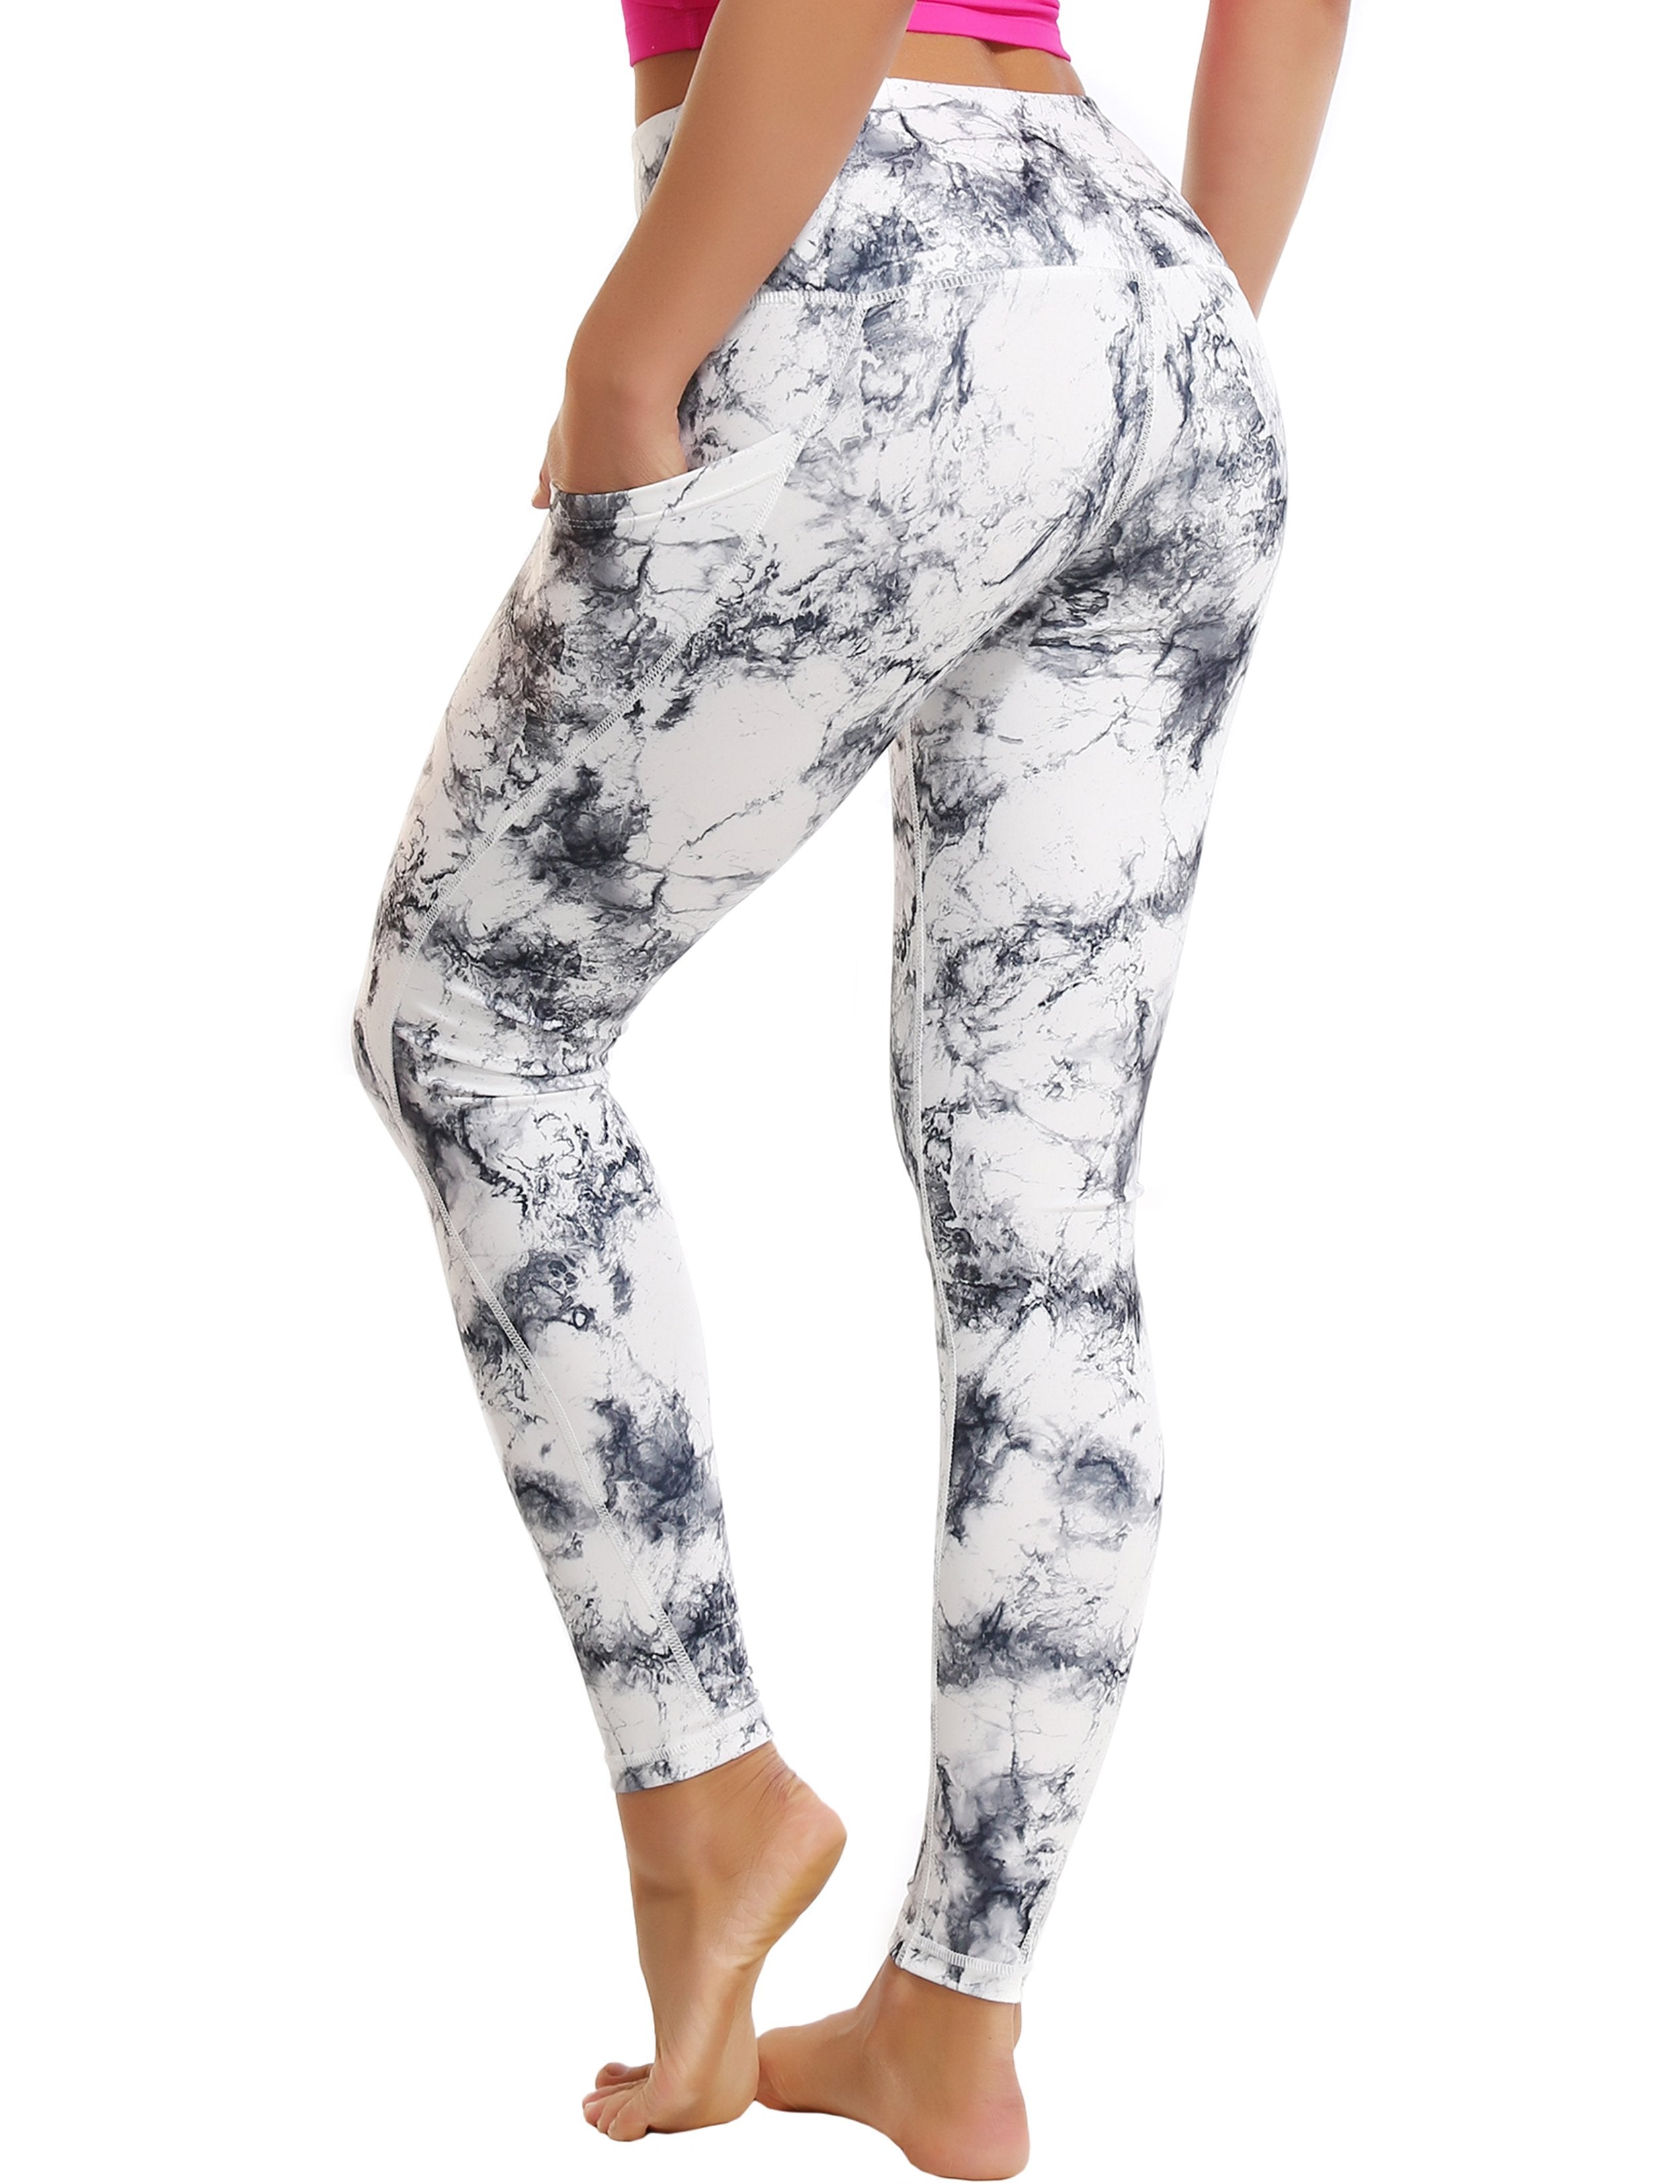 High Waist Side Pockets Jogging Pants arabescato 78%Polyester/22%Spandex Fabric doesn't attract lint easily 4-way stretch No see-through Moisture-wicking Tummy control Inner pocket